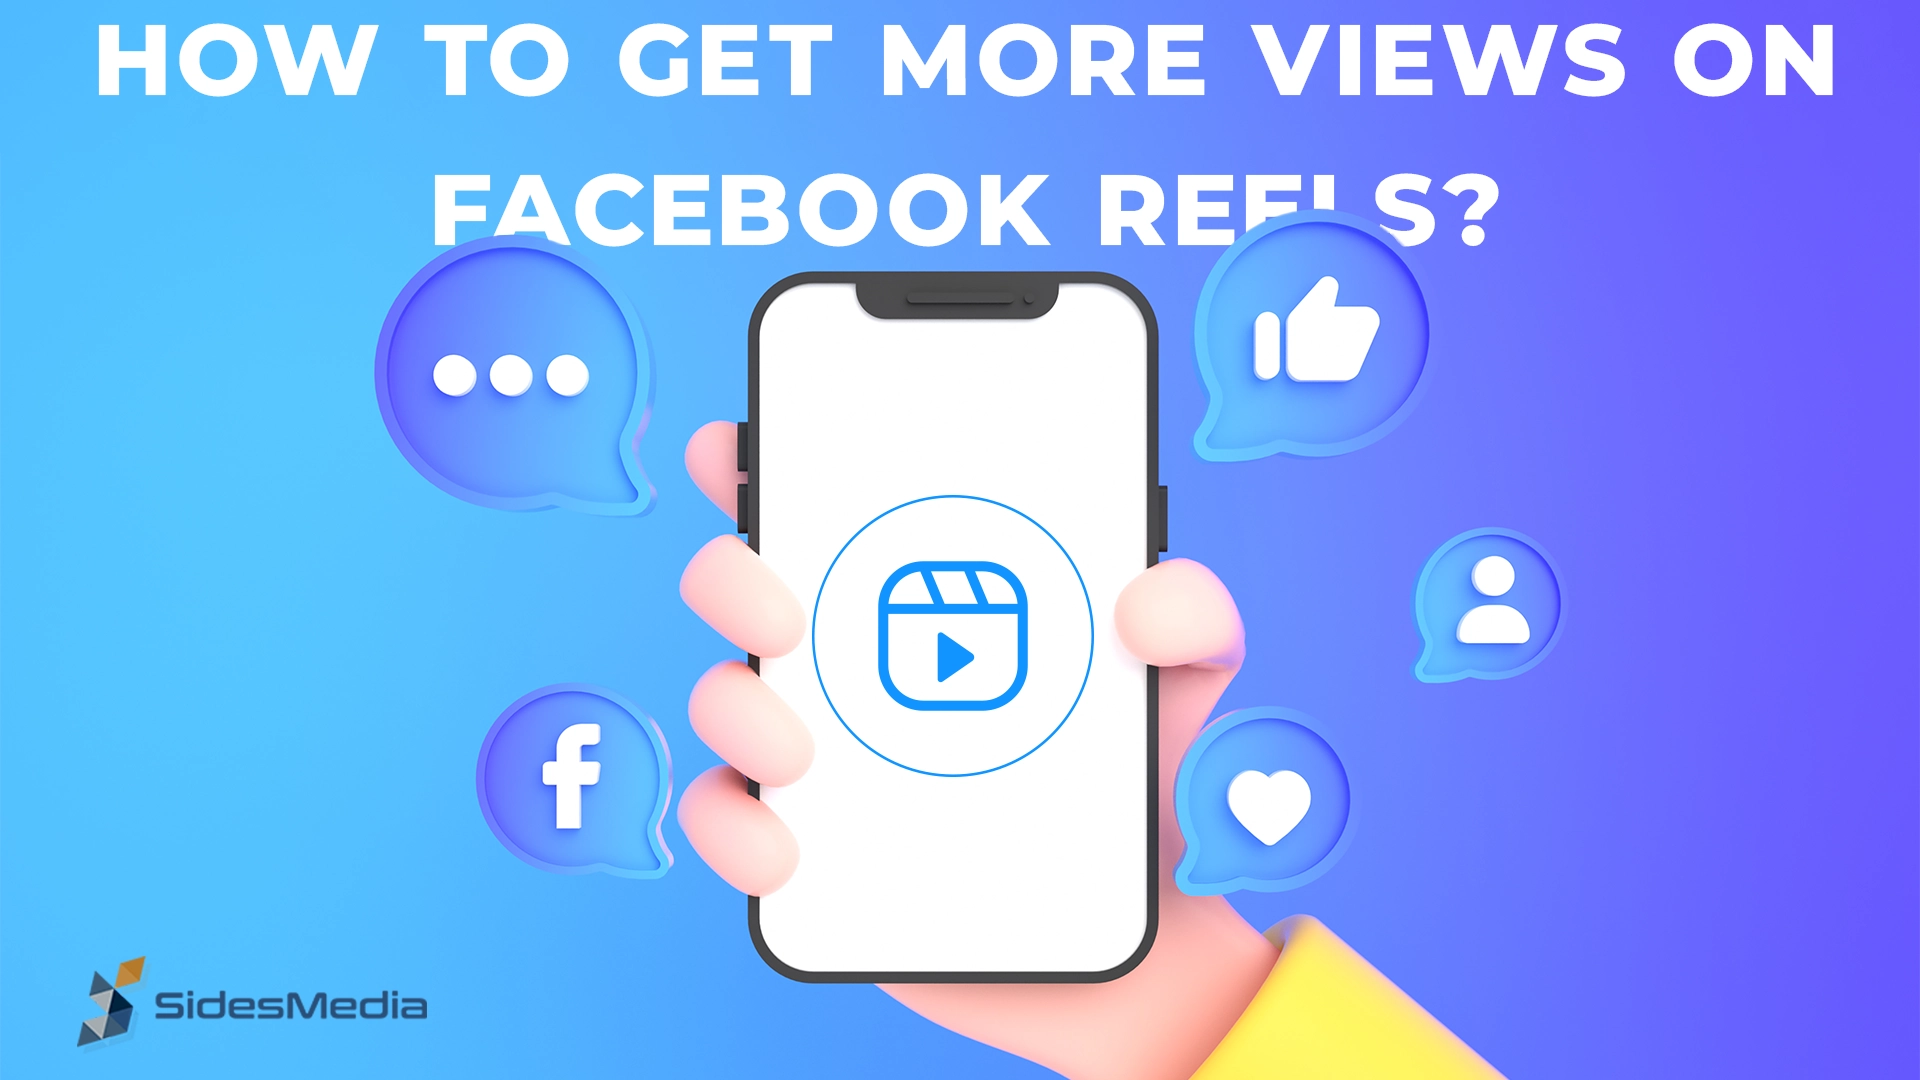 How to Get More Views on Facebook Reels: An Easy Guide